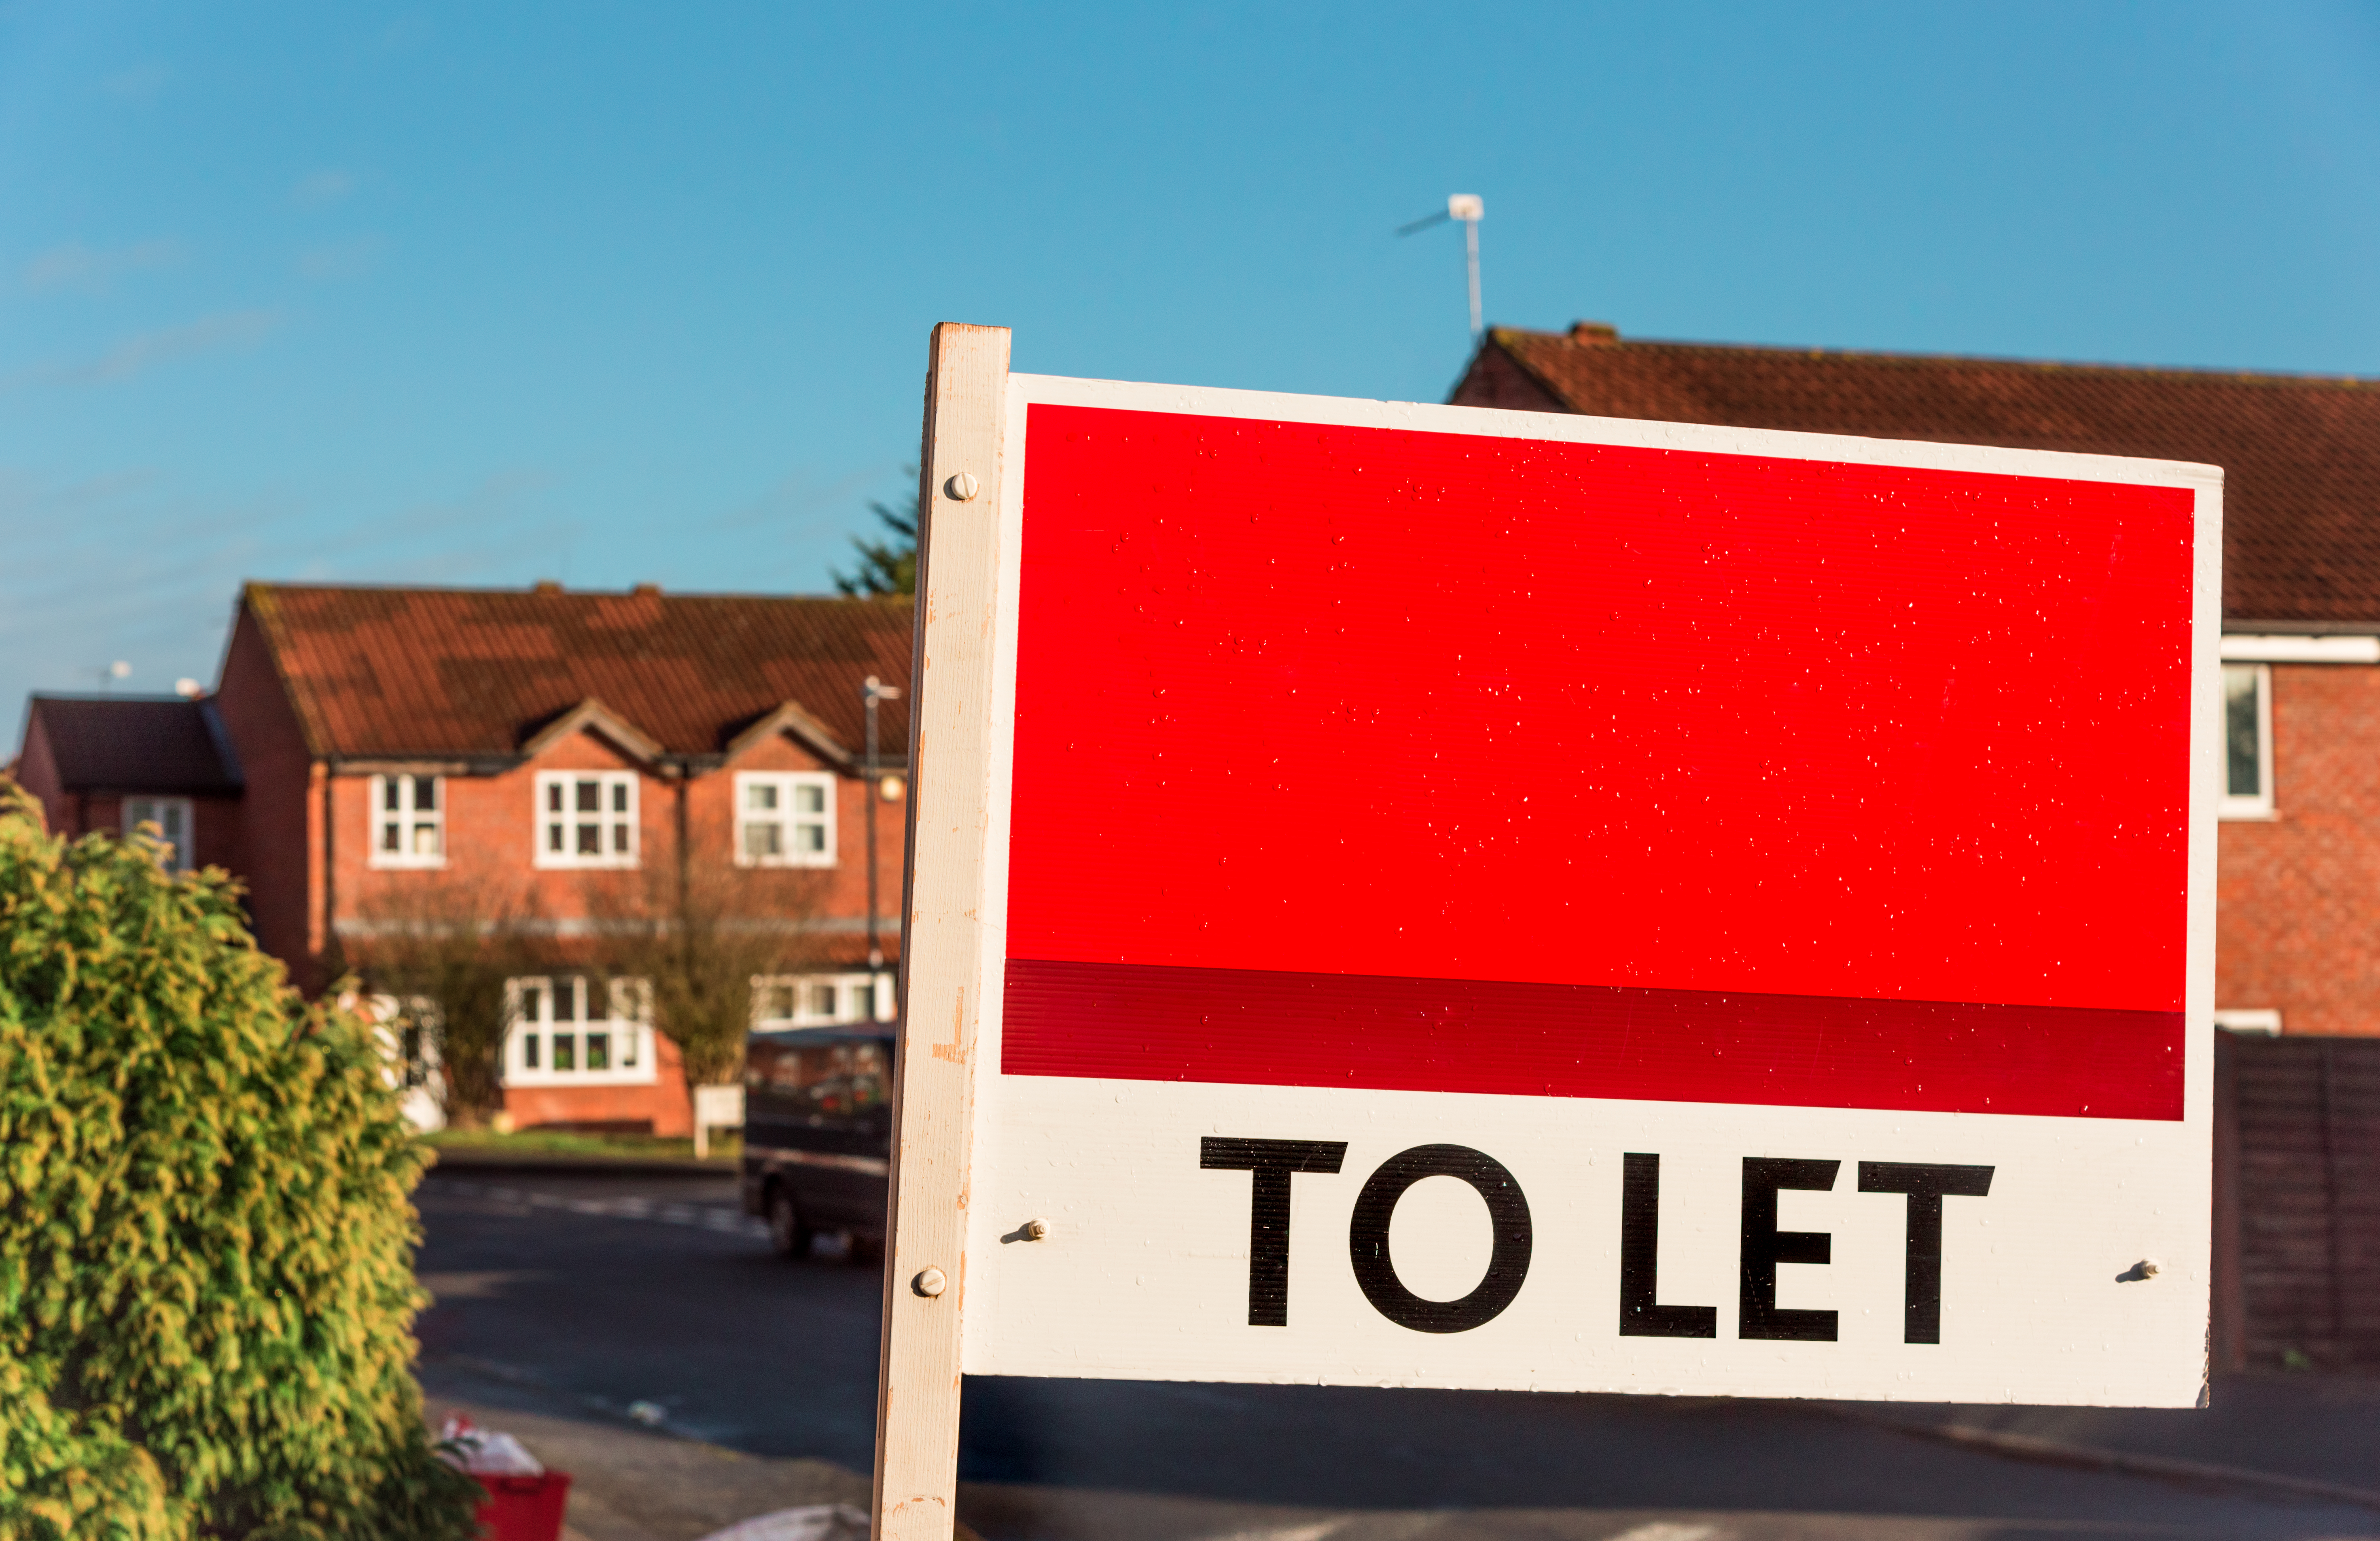 A To Let sign with house in background